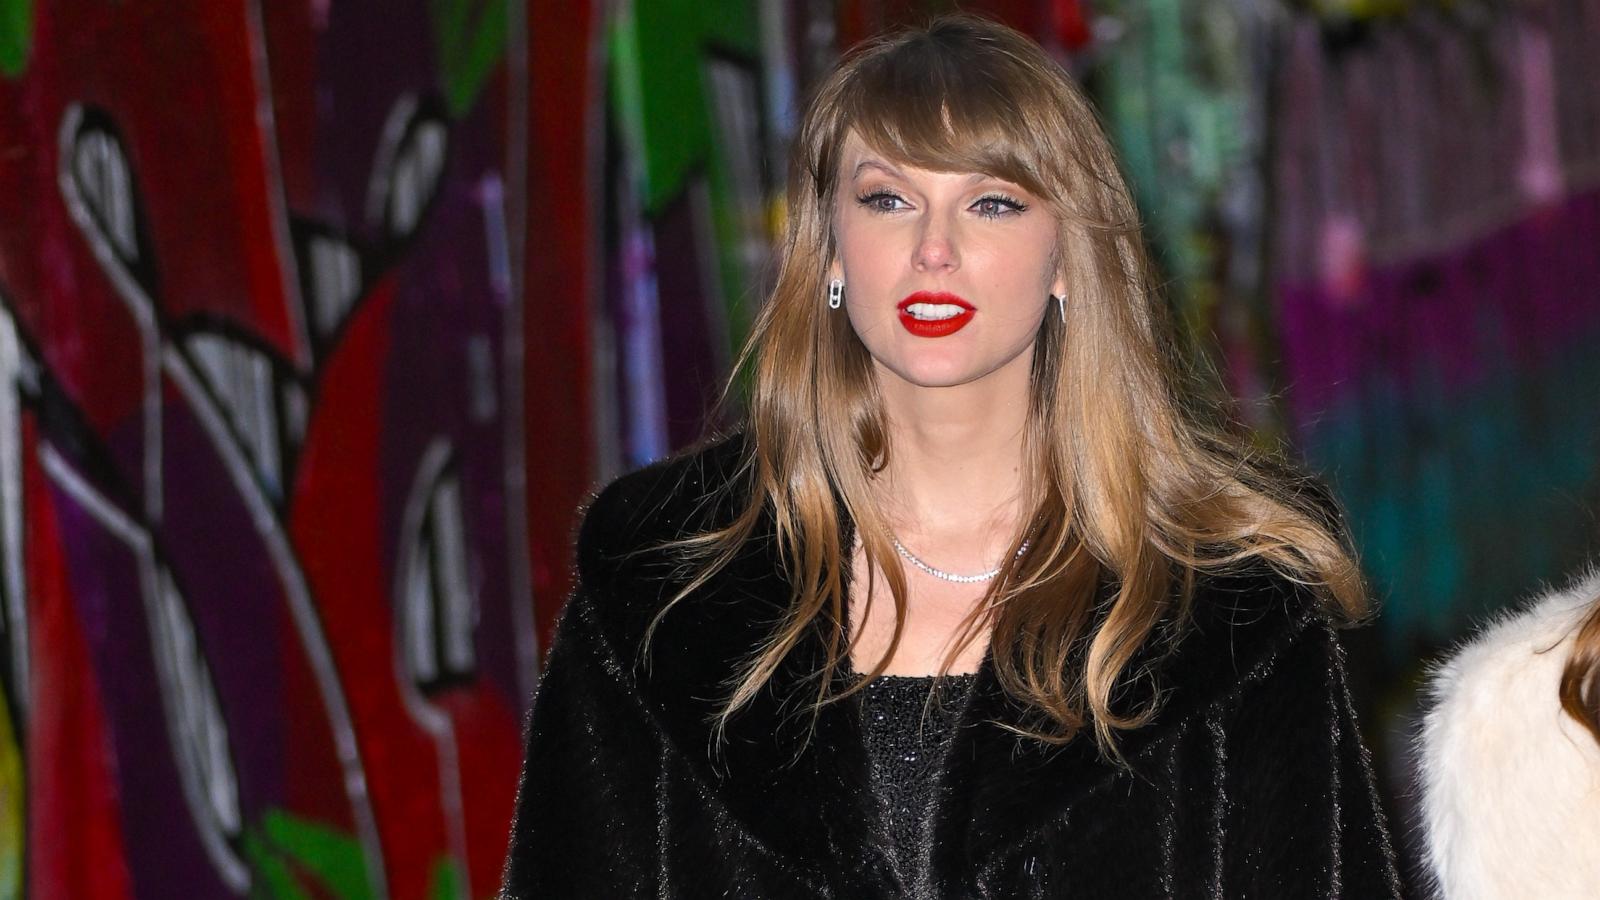 Taylor Swift's 34th Birthday Party: Photos of Blake Lively and